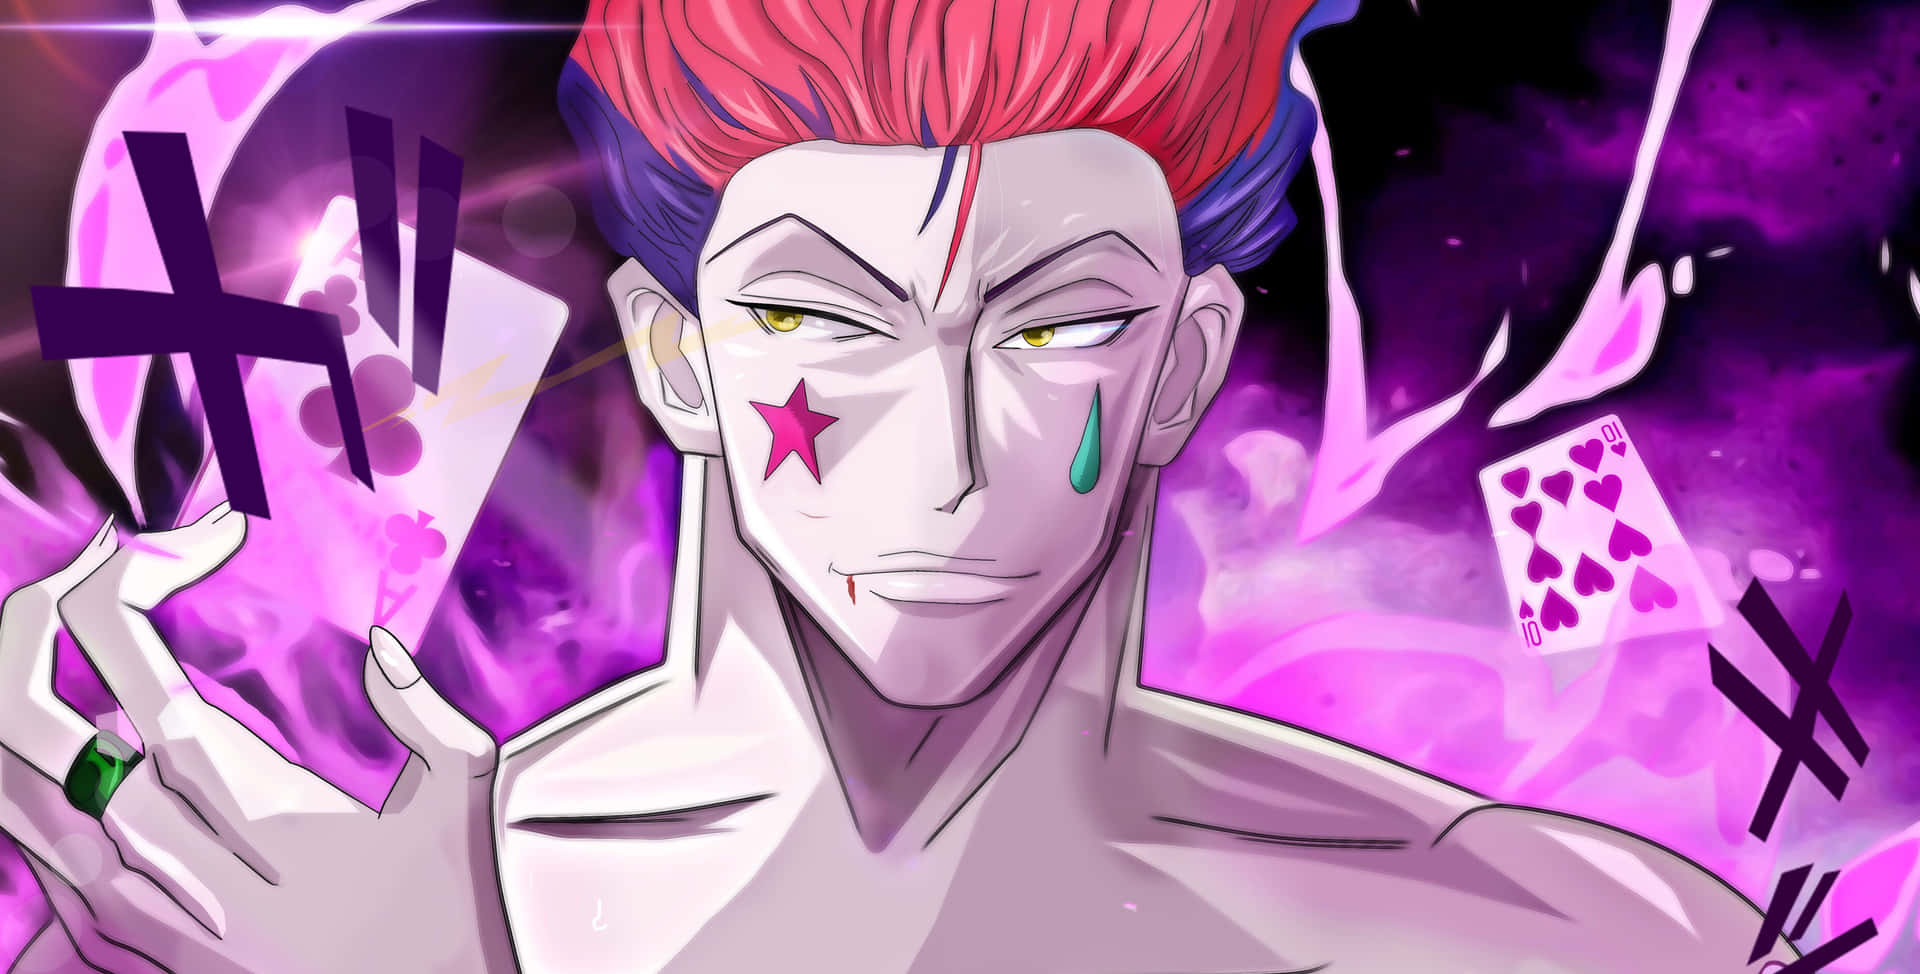 Hisoka, the mysterious and mischievous magician